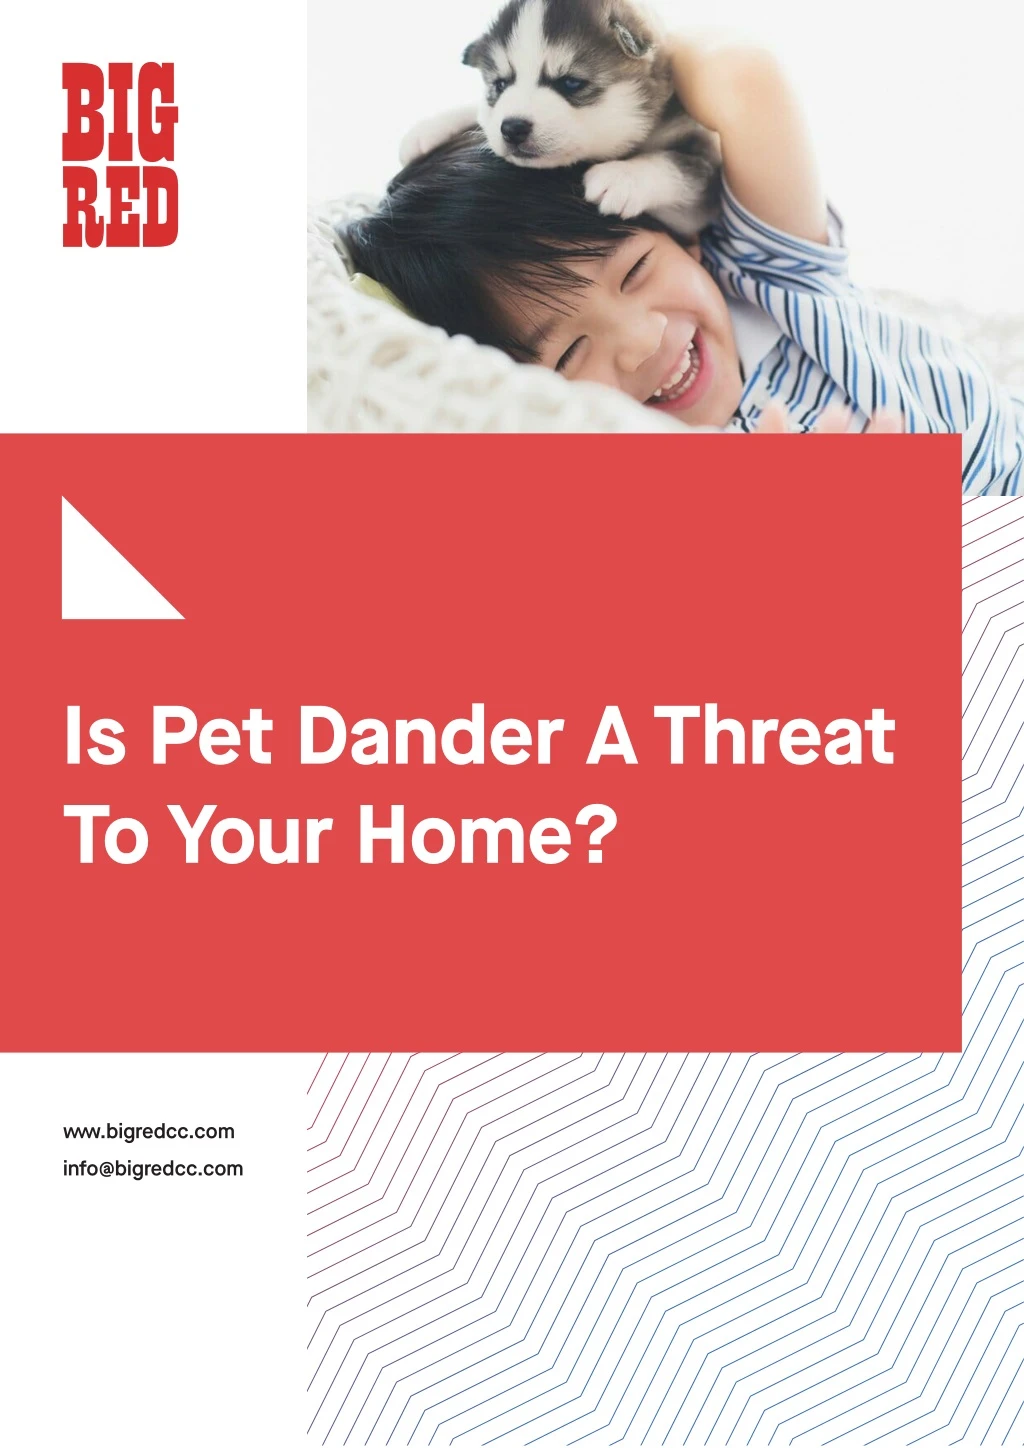 is pet dander a threat to your home